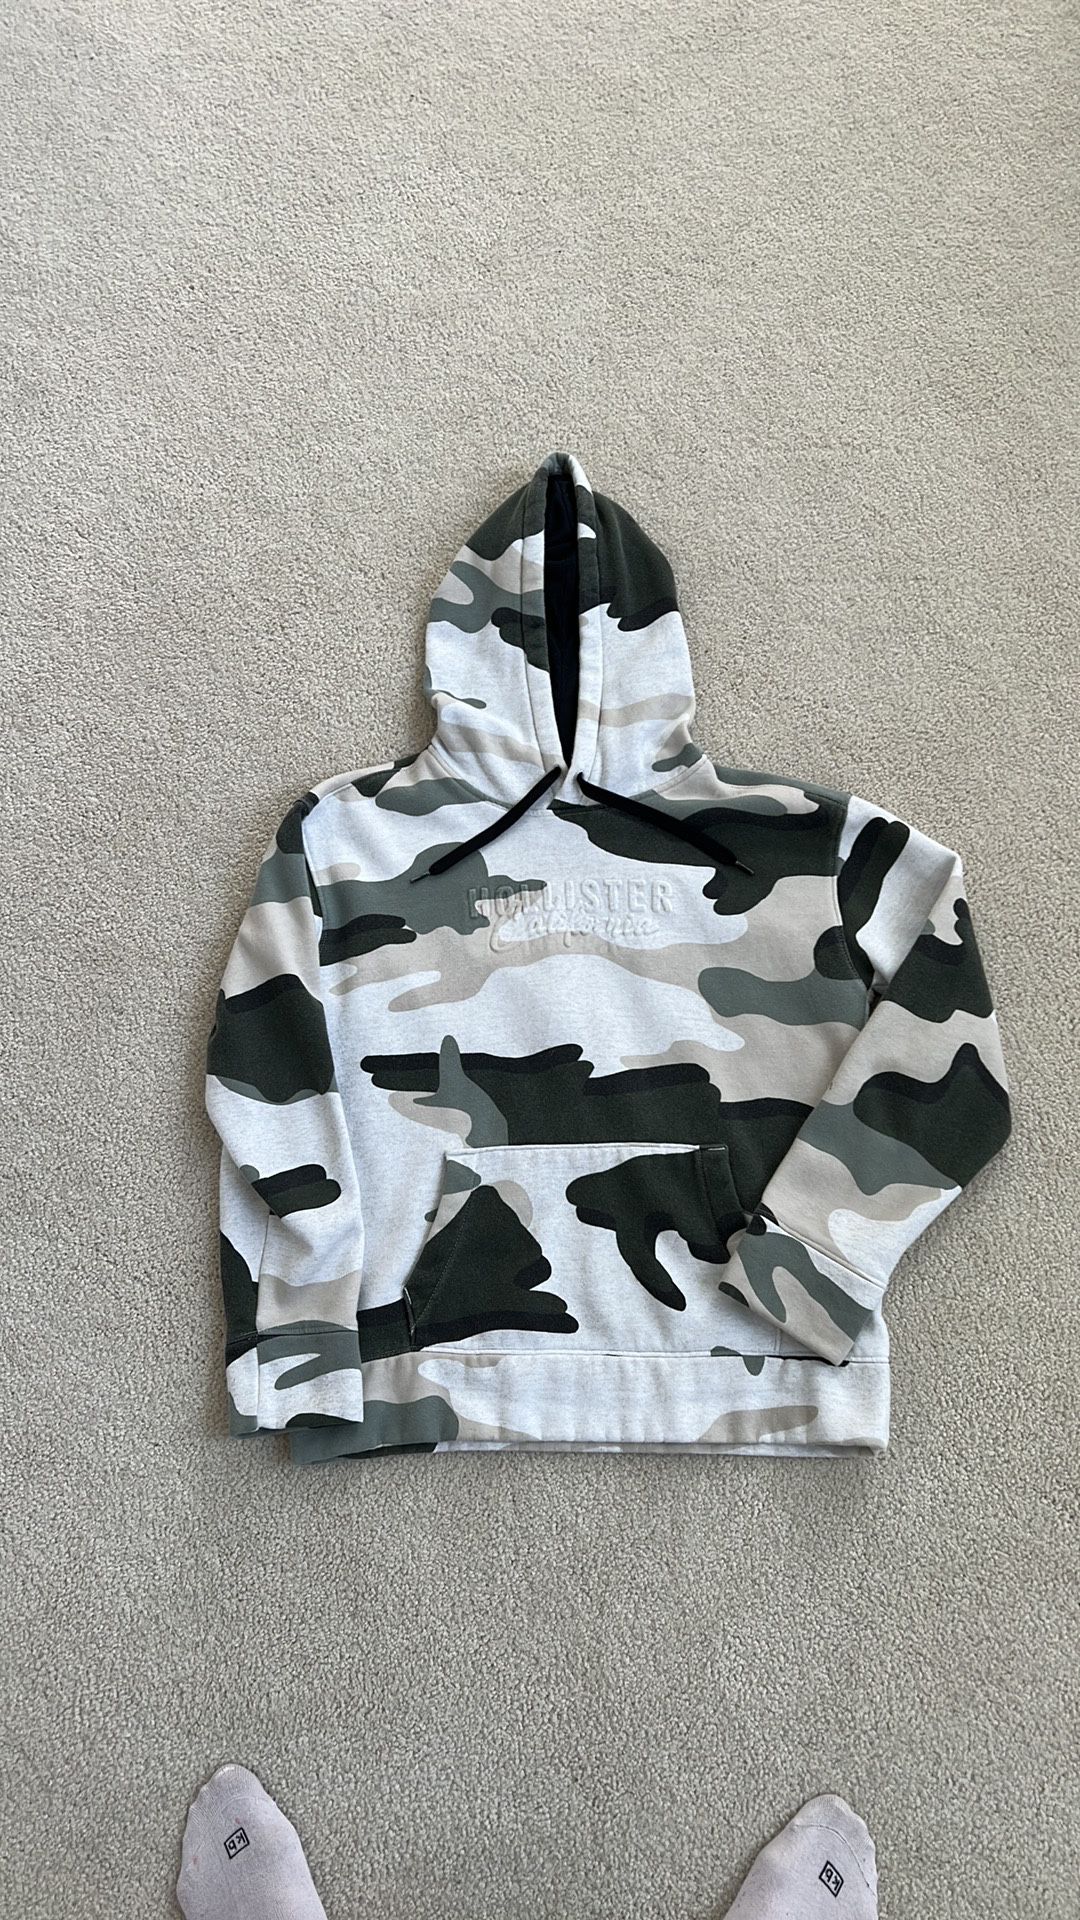 Hollister Hoodie Small 